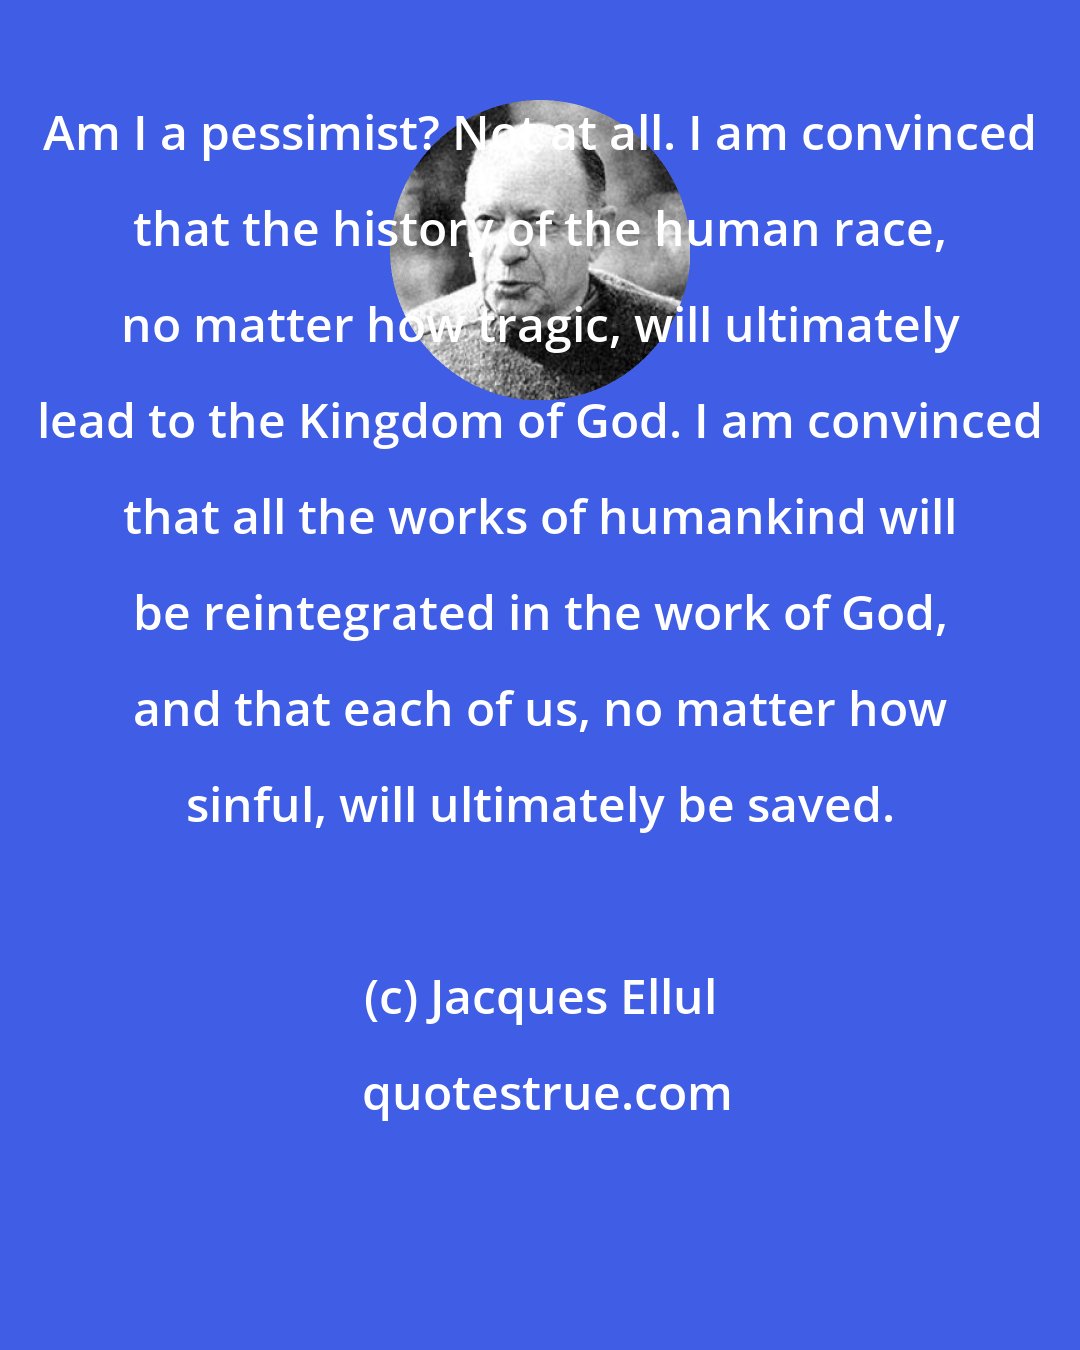 Jacques Ellul: Am I a pessimist? Not at all. I am convinced that the history of the human race, no matter how tragic, will ultimately lead to the Kingdom of God. I am convinced that all the works of humankind will be reintegrated in the work of God, and that each of us, no matter how sinful, will ultimately be saved.